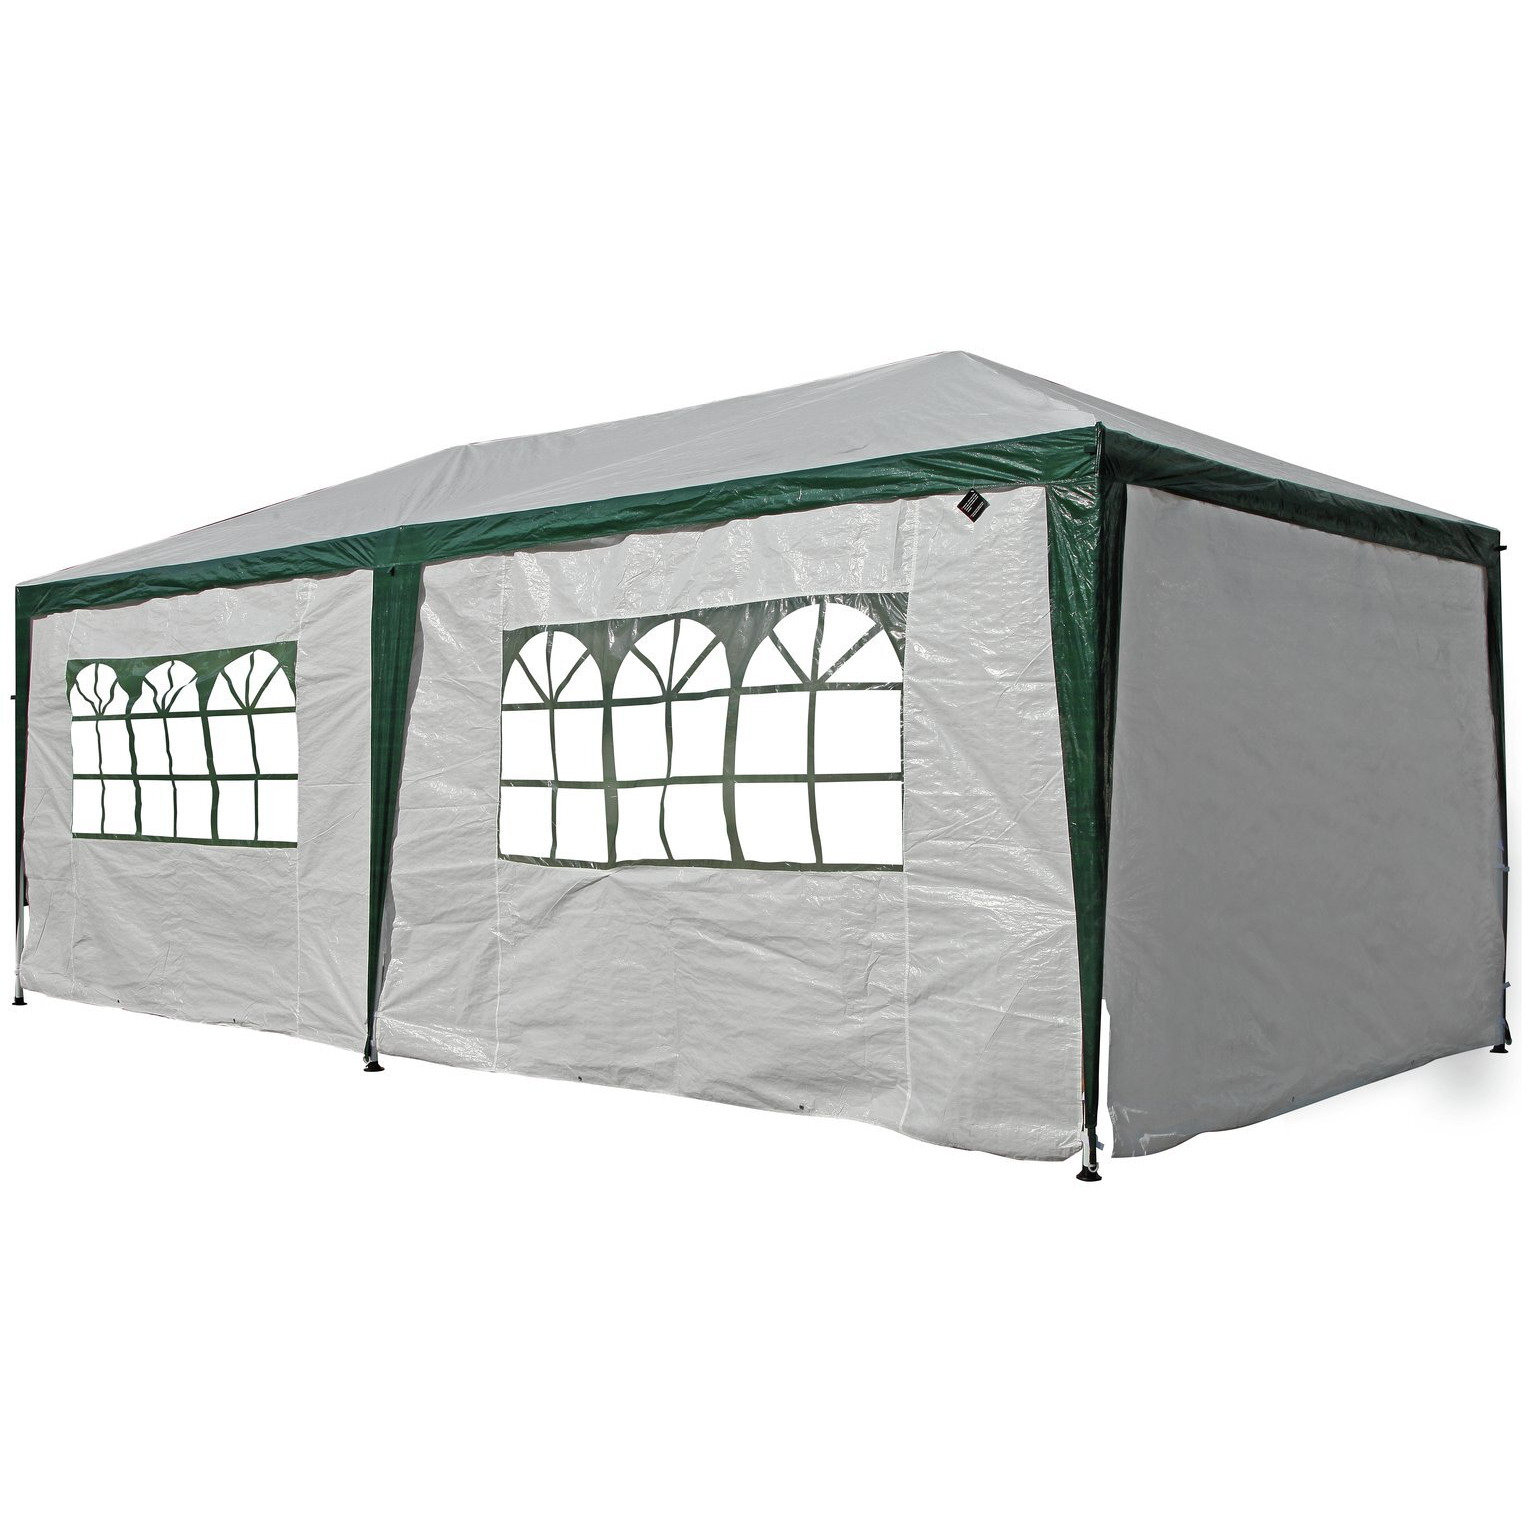 Argos Home 3m x 6m Weather Resistant Gazebo with Side Panels - image 1